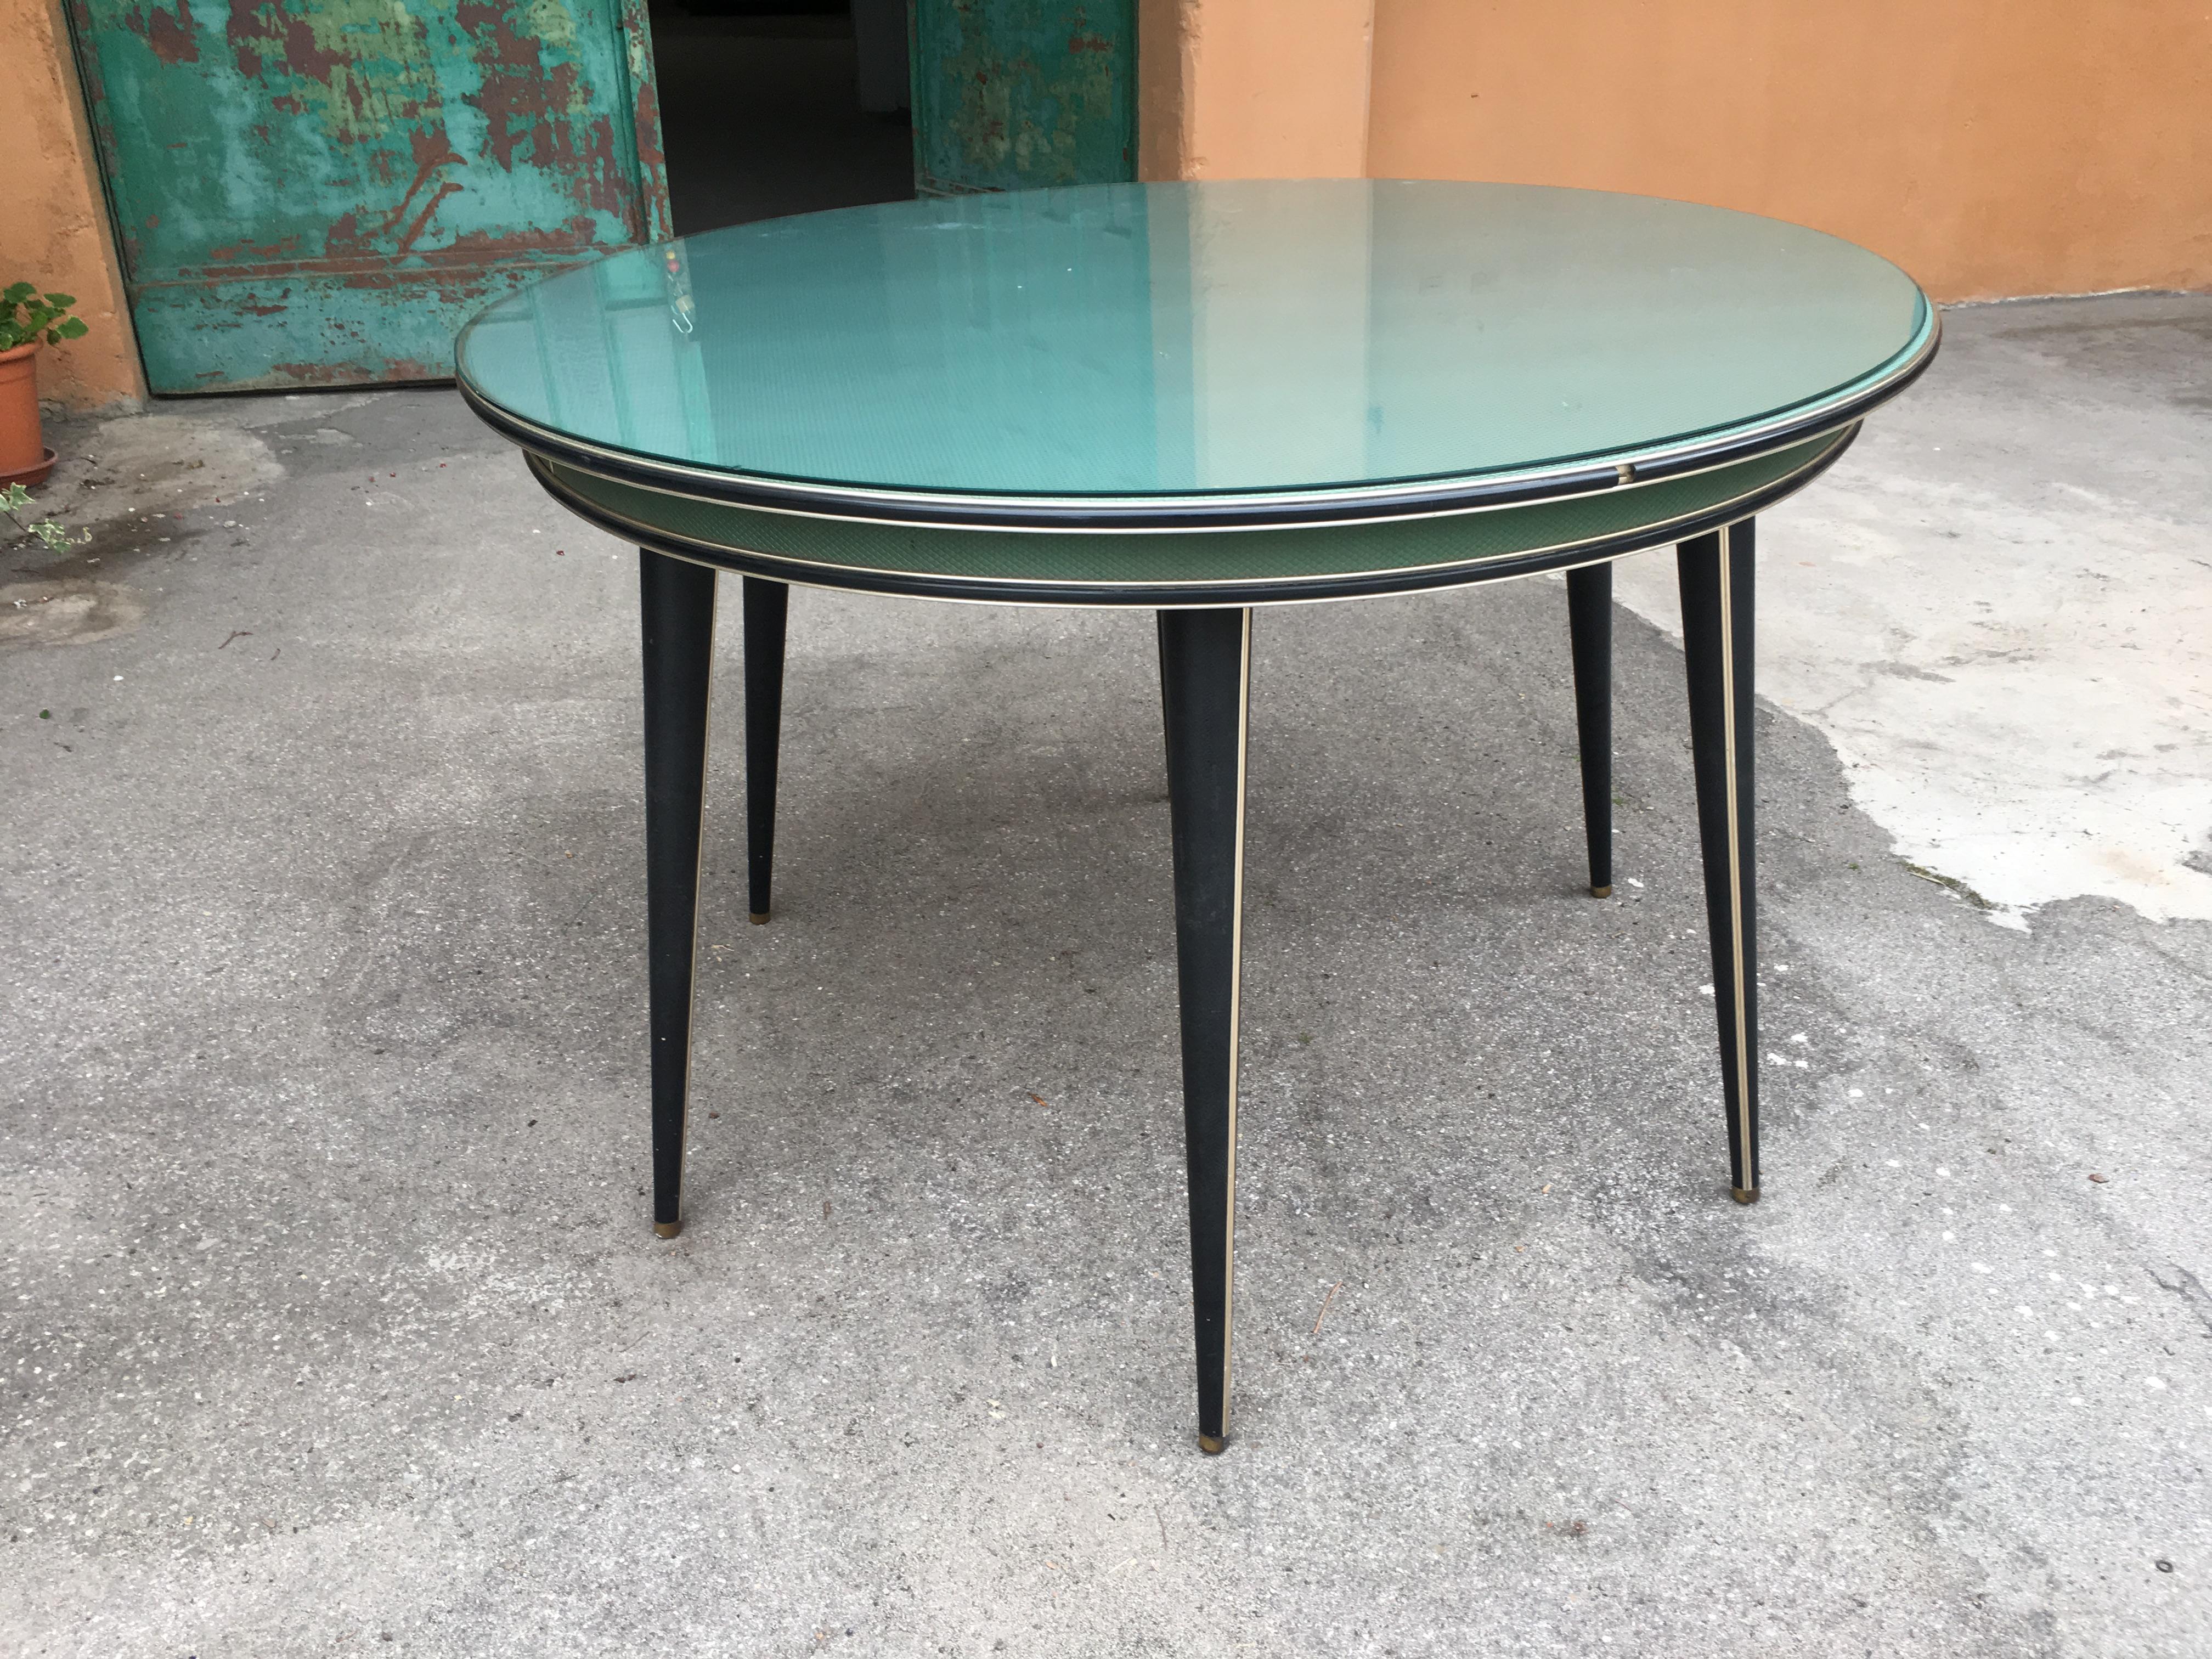 Mid-Century Modern Italian six legs round table with glass top by Umberto Mascagni, 1960s.